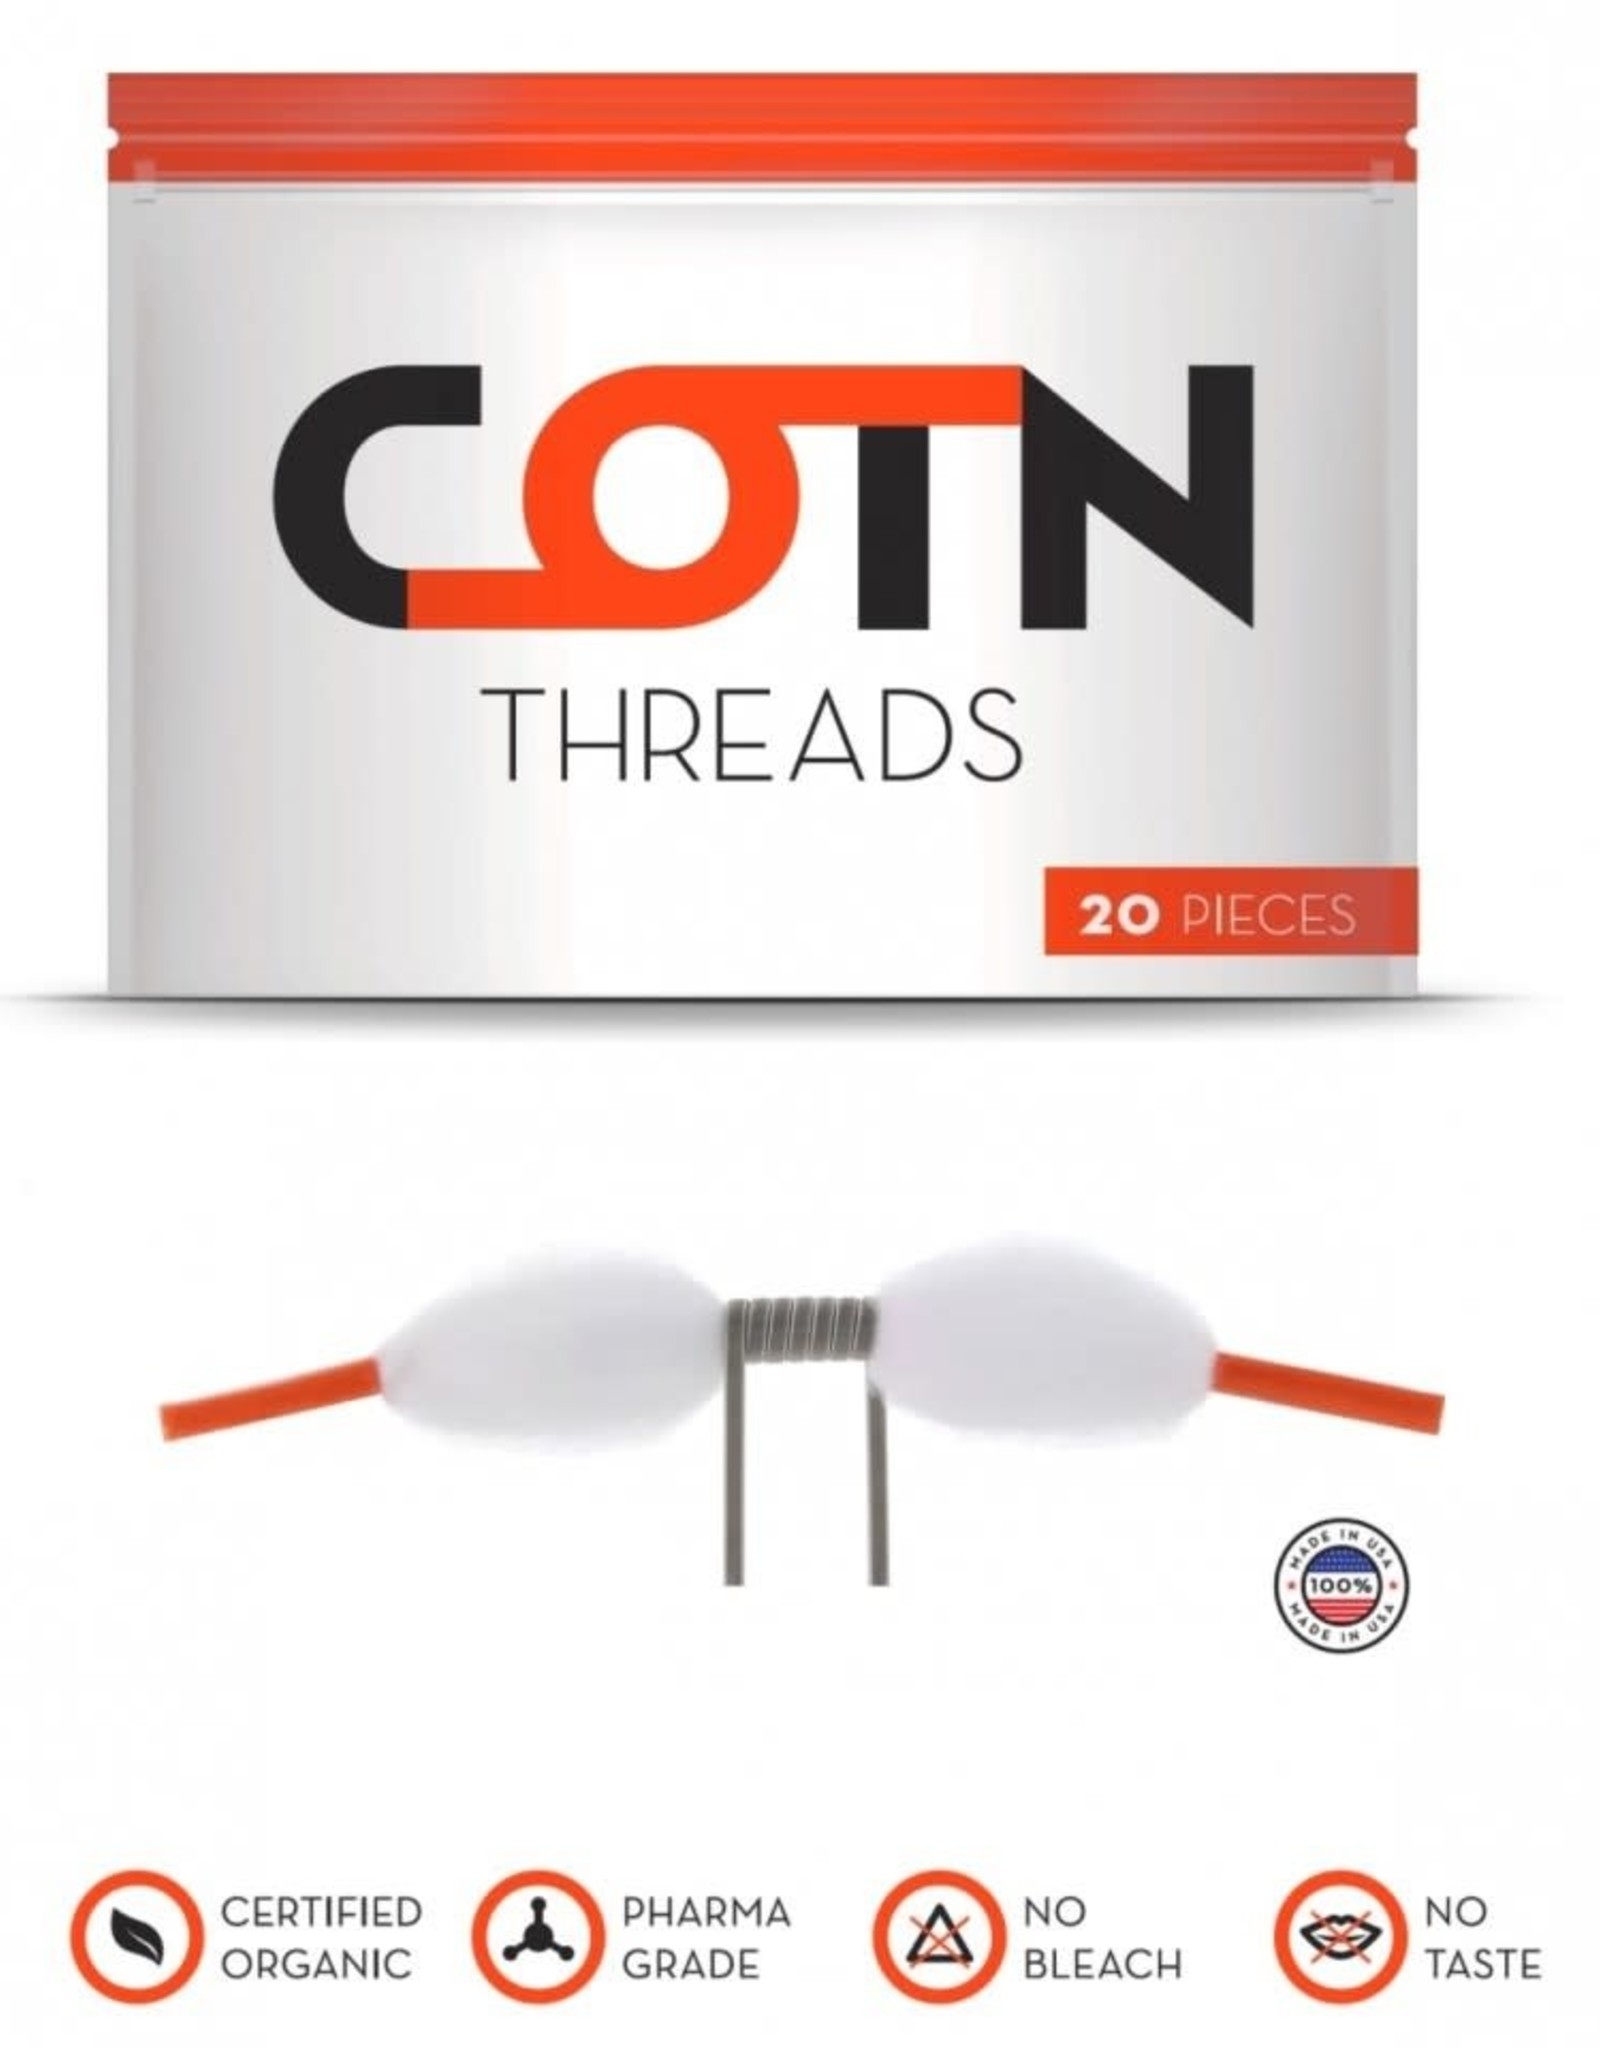 Cotn COTN Threads